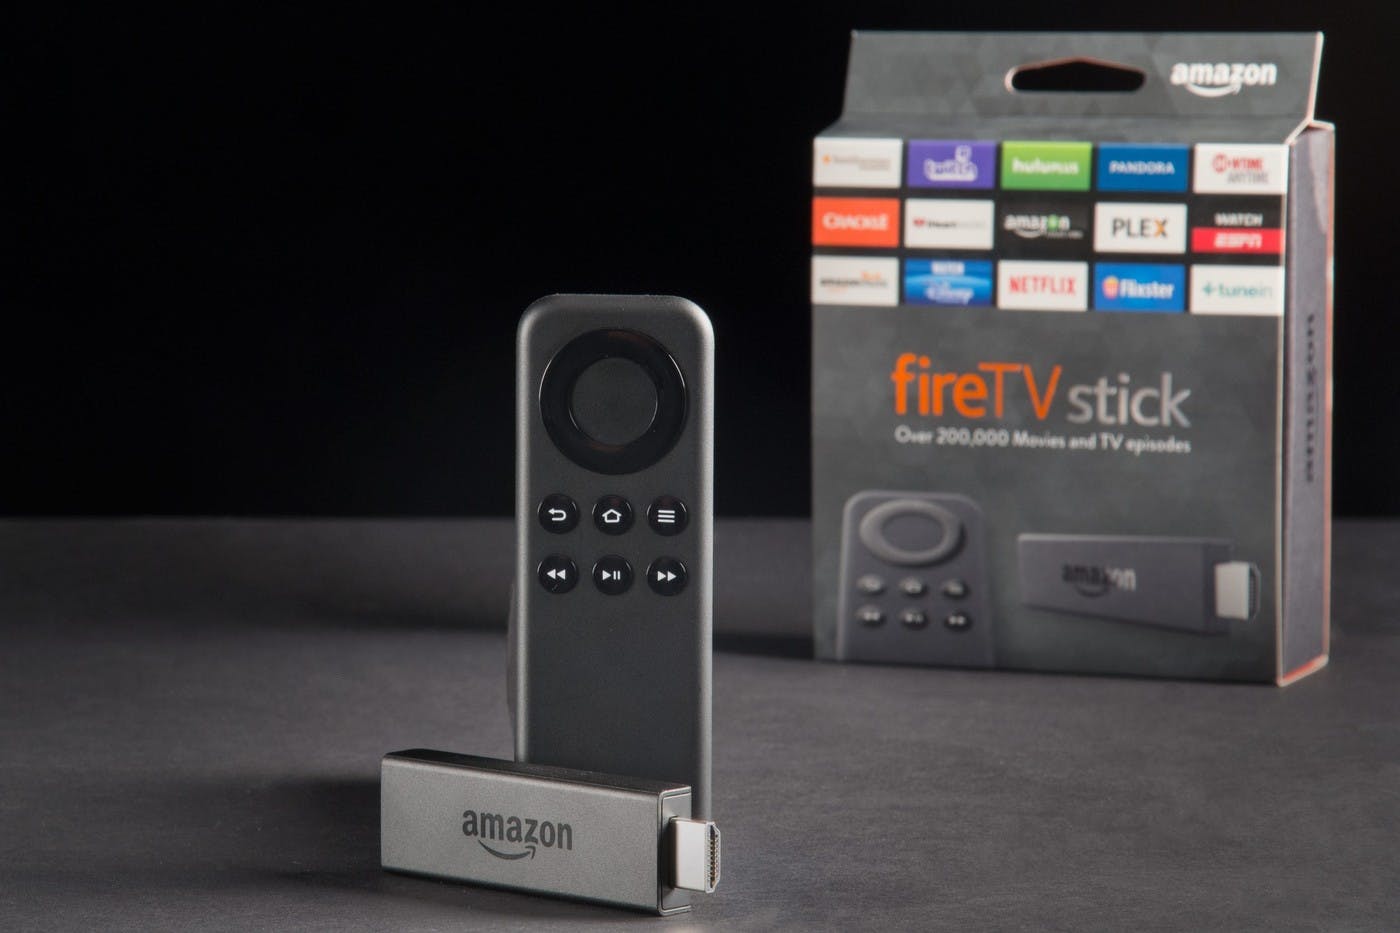 Fire TV Stick: What it is and how to use it